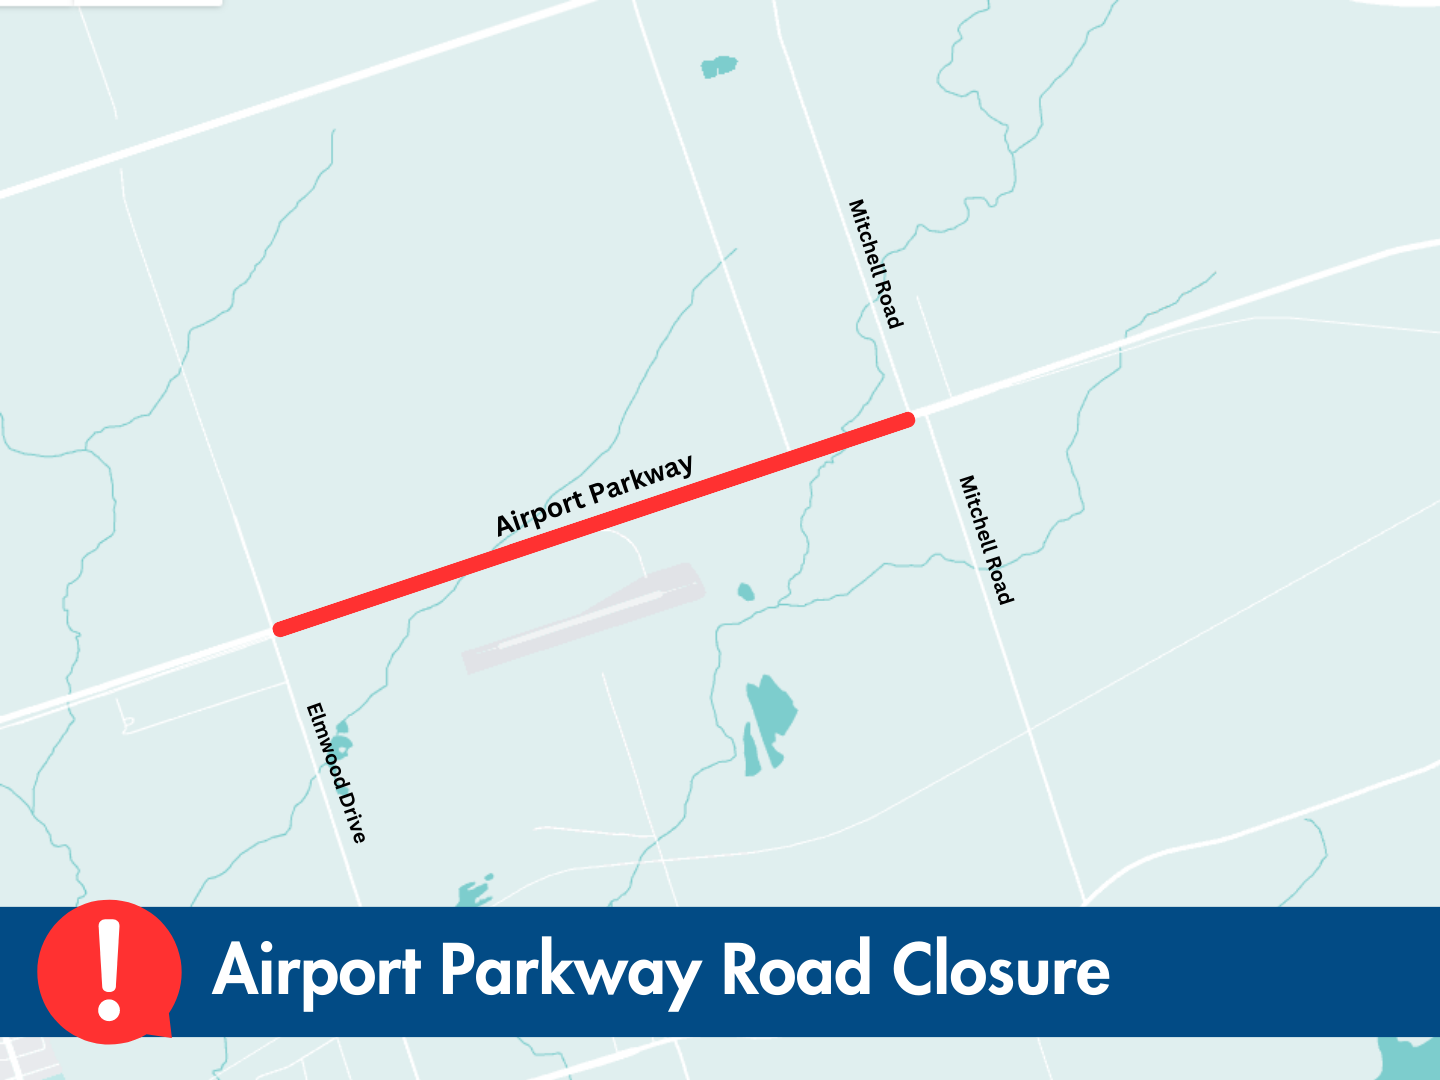 Graphic with a map showing the road closure of Airport Parkway between Elmwood Drive and Mitchell Road